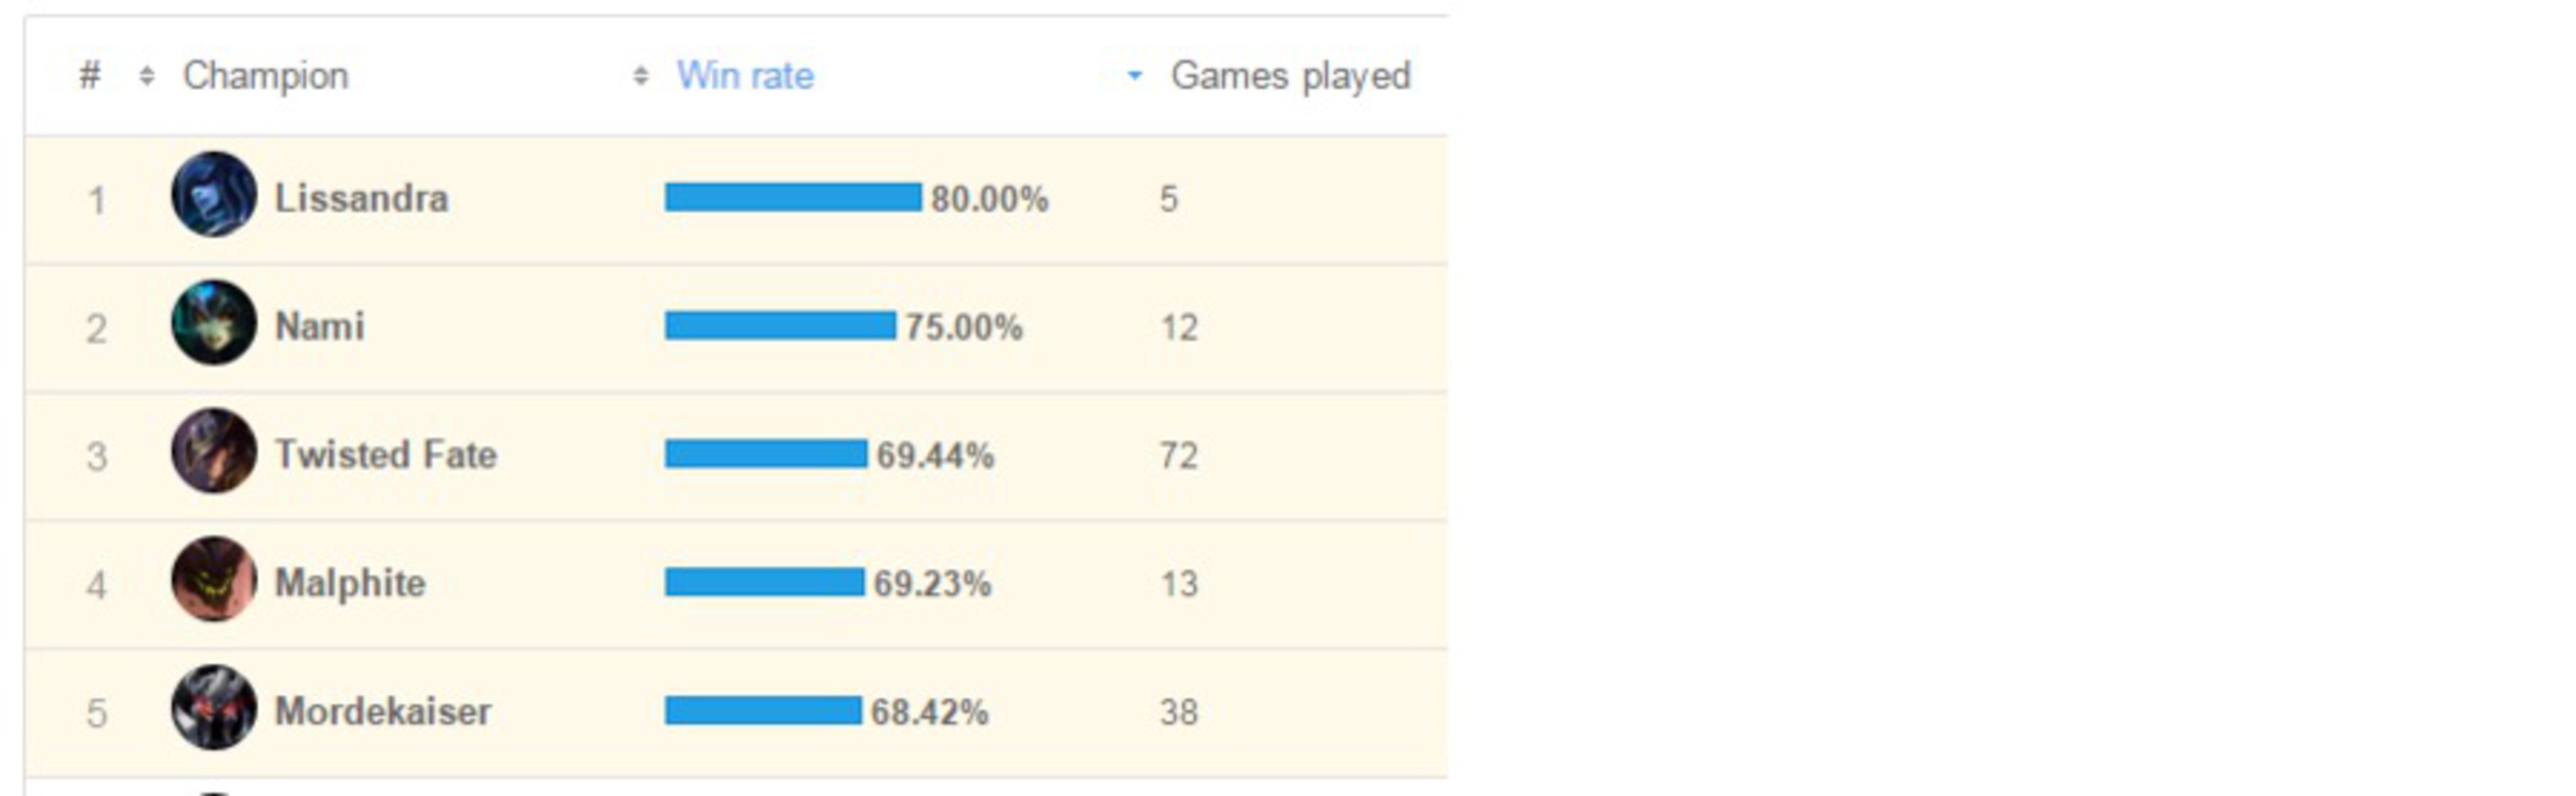 Top win rate challenger with games played.png.thumb